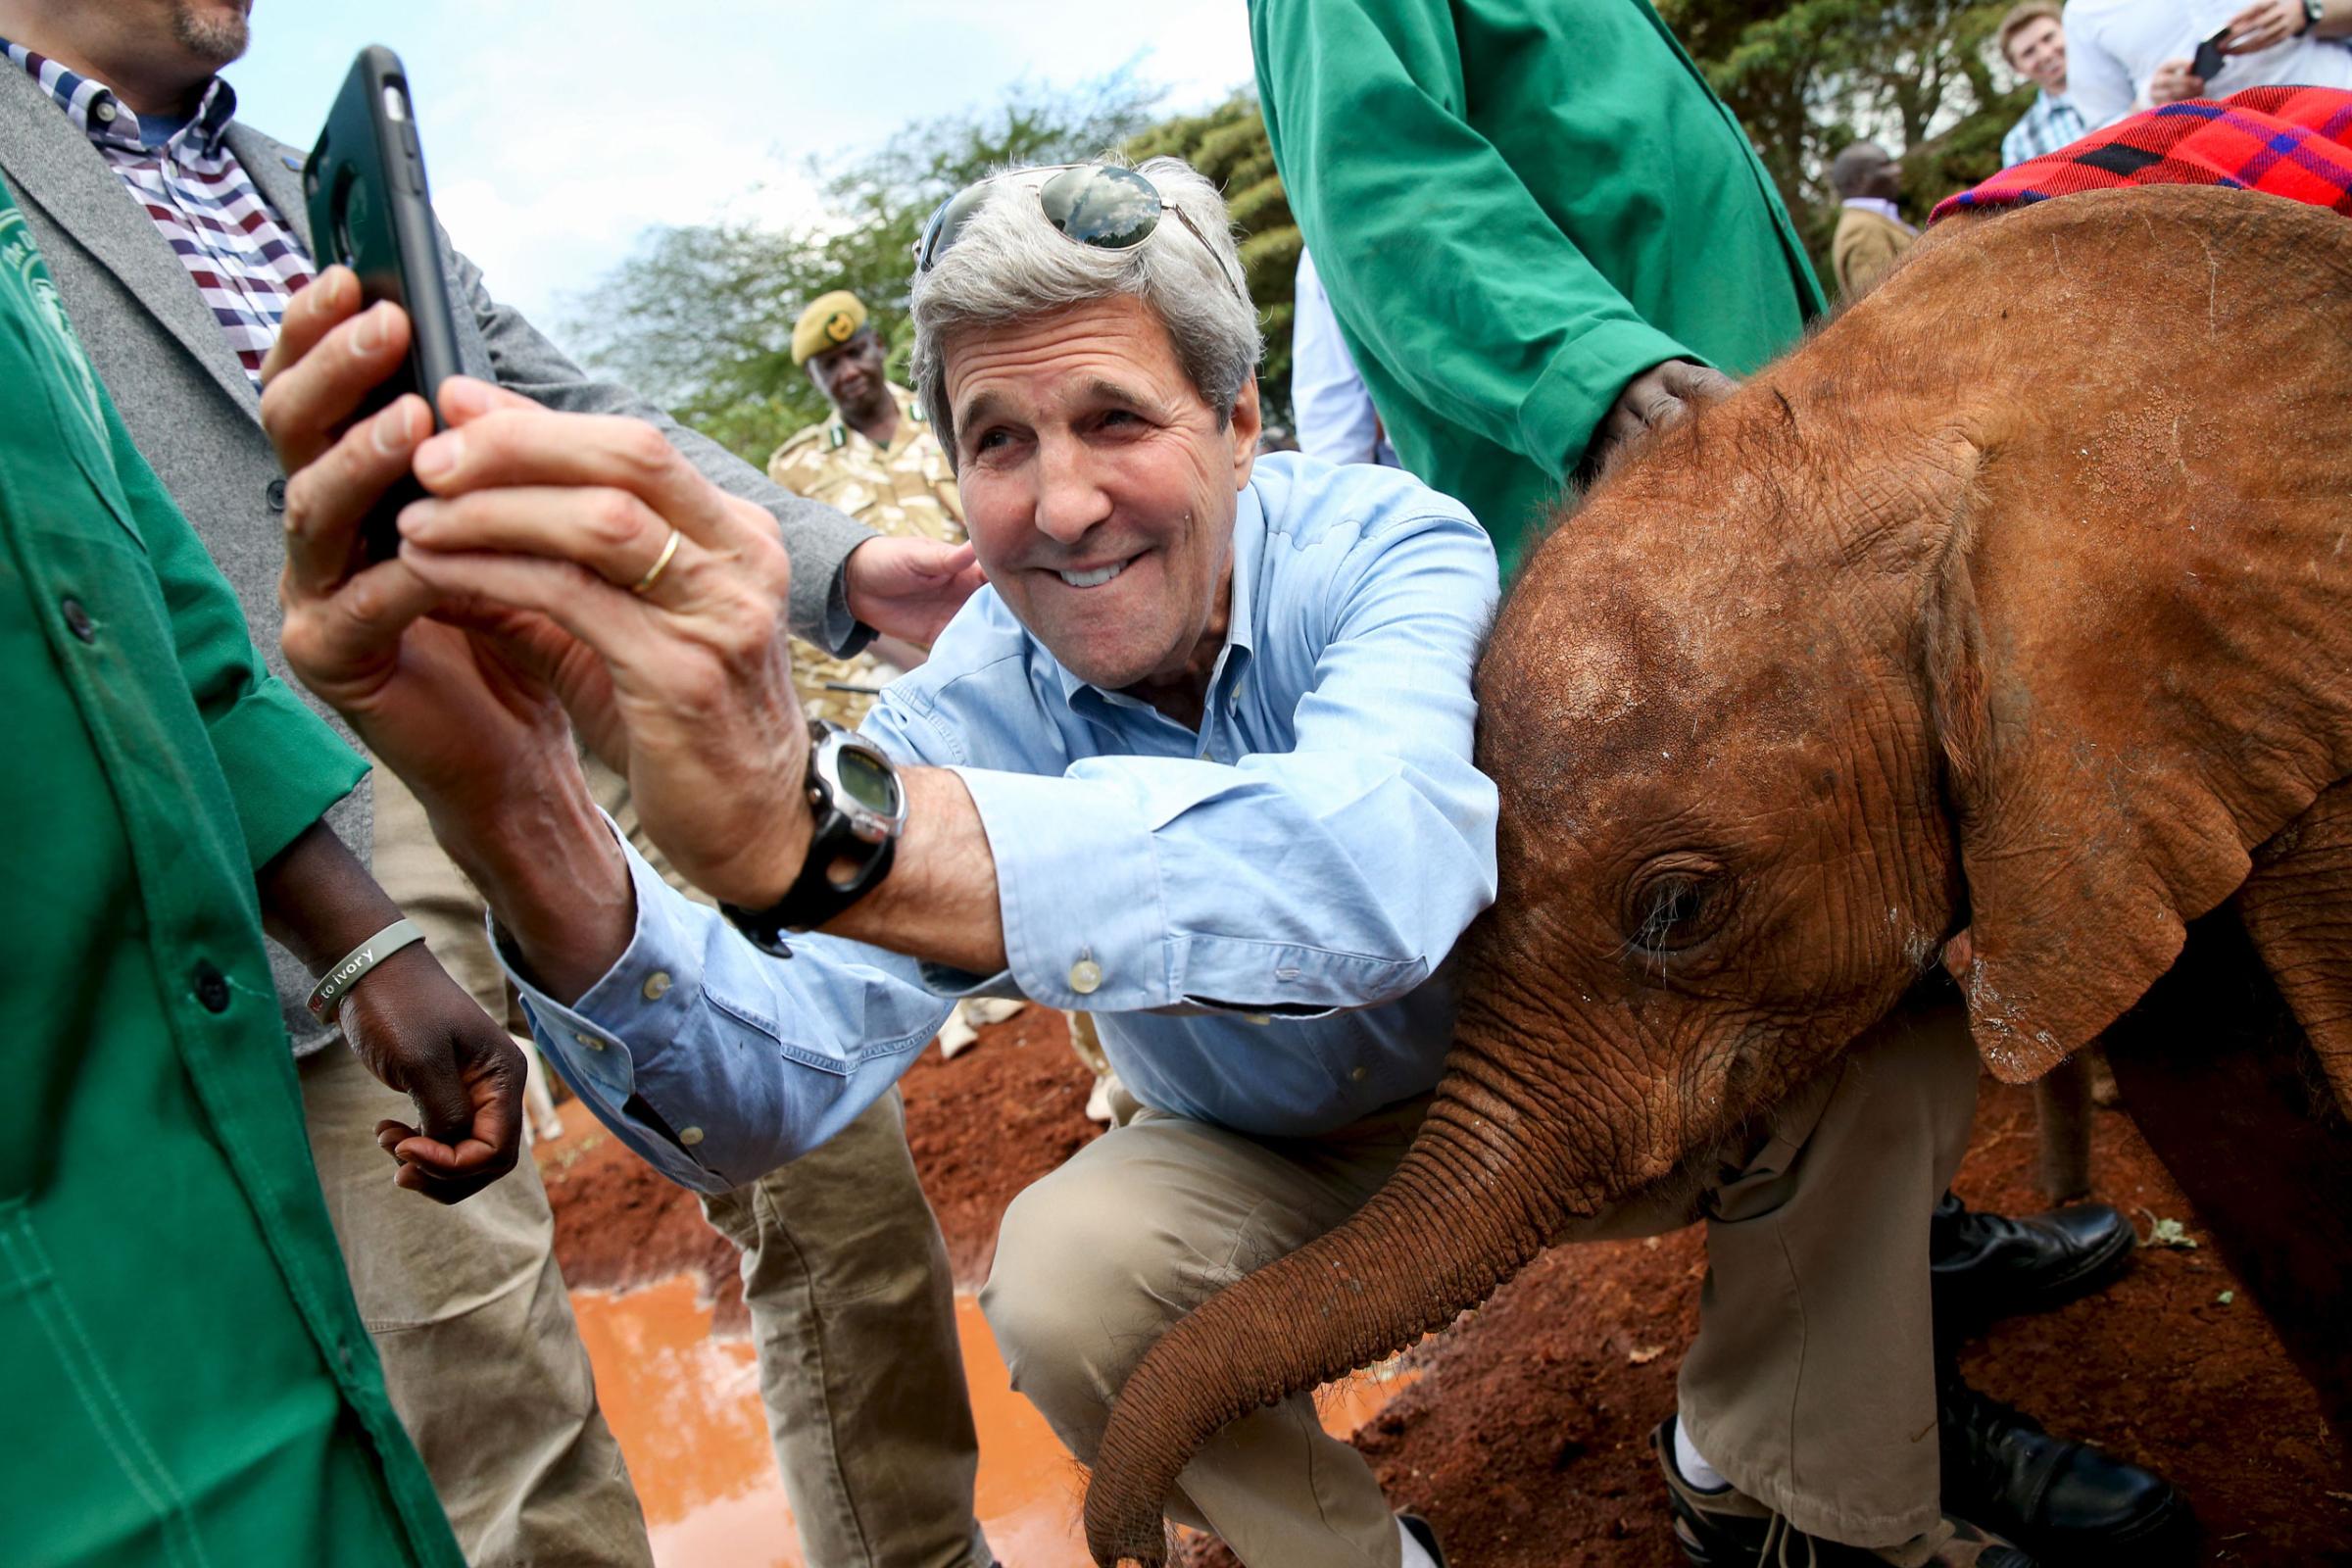 U.S. Secretary of State John Kerry takes a selfie with a baby elephant while touring the Sheldrick Center Elephant Orphanage at the Nairobi National Park